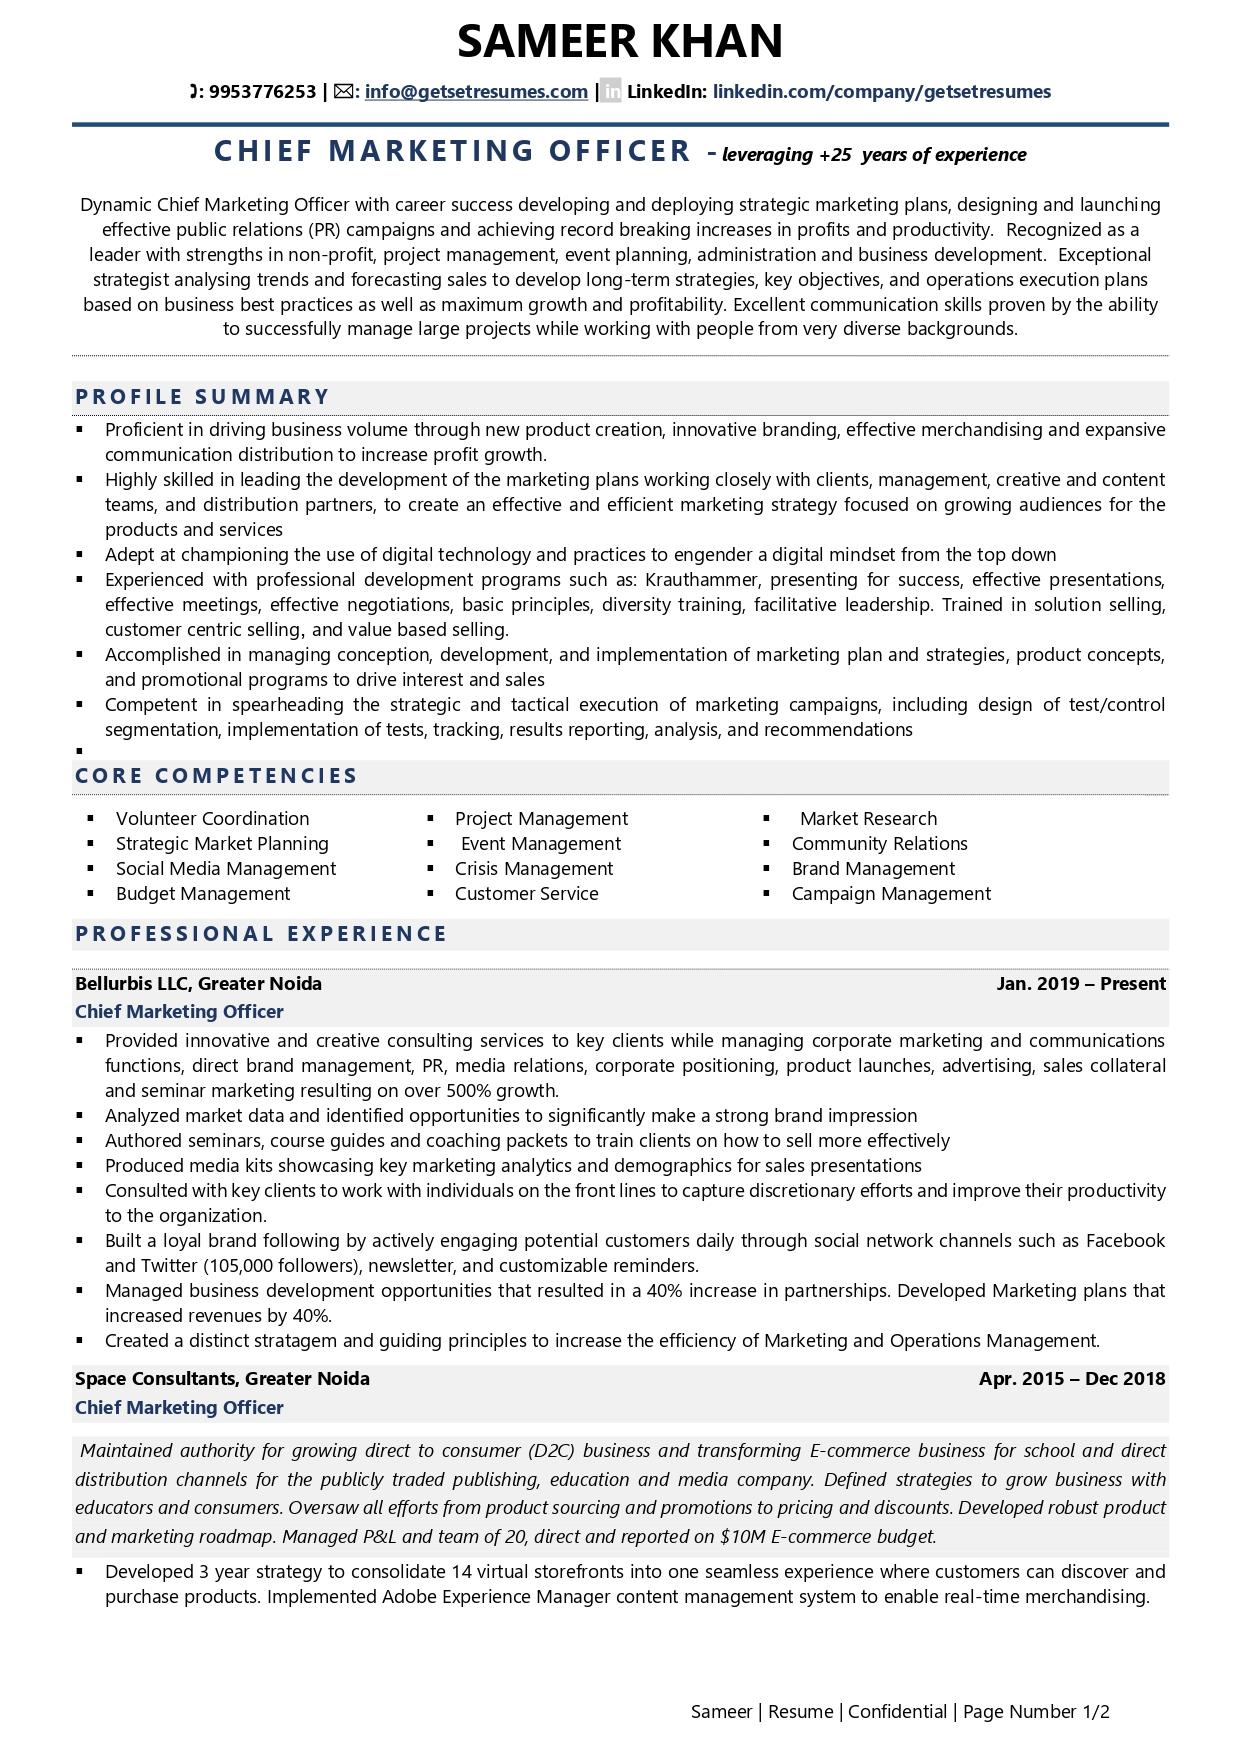 Chief Marketing Officer Resume Examples Template (with job winning tips)